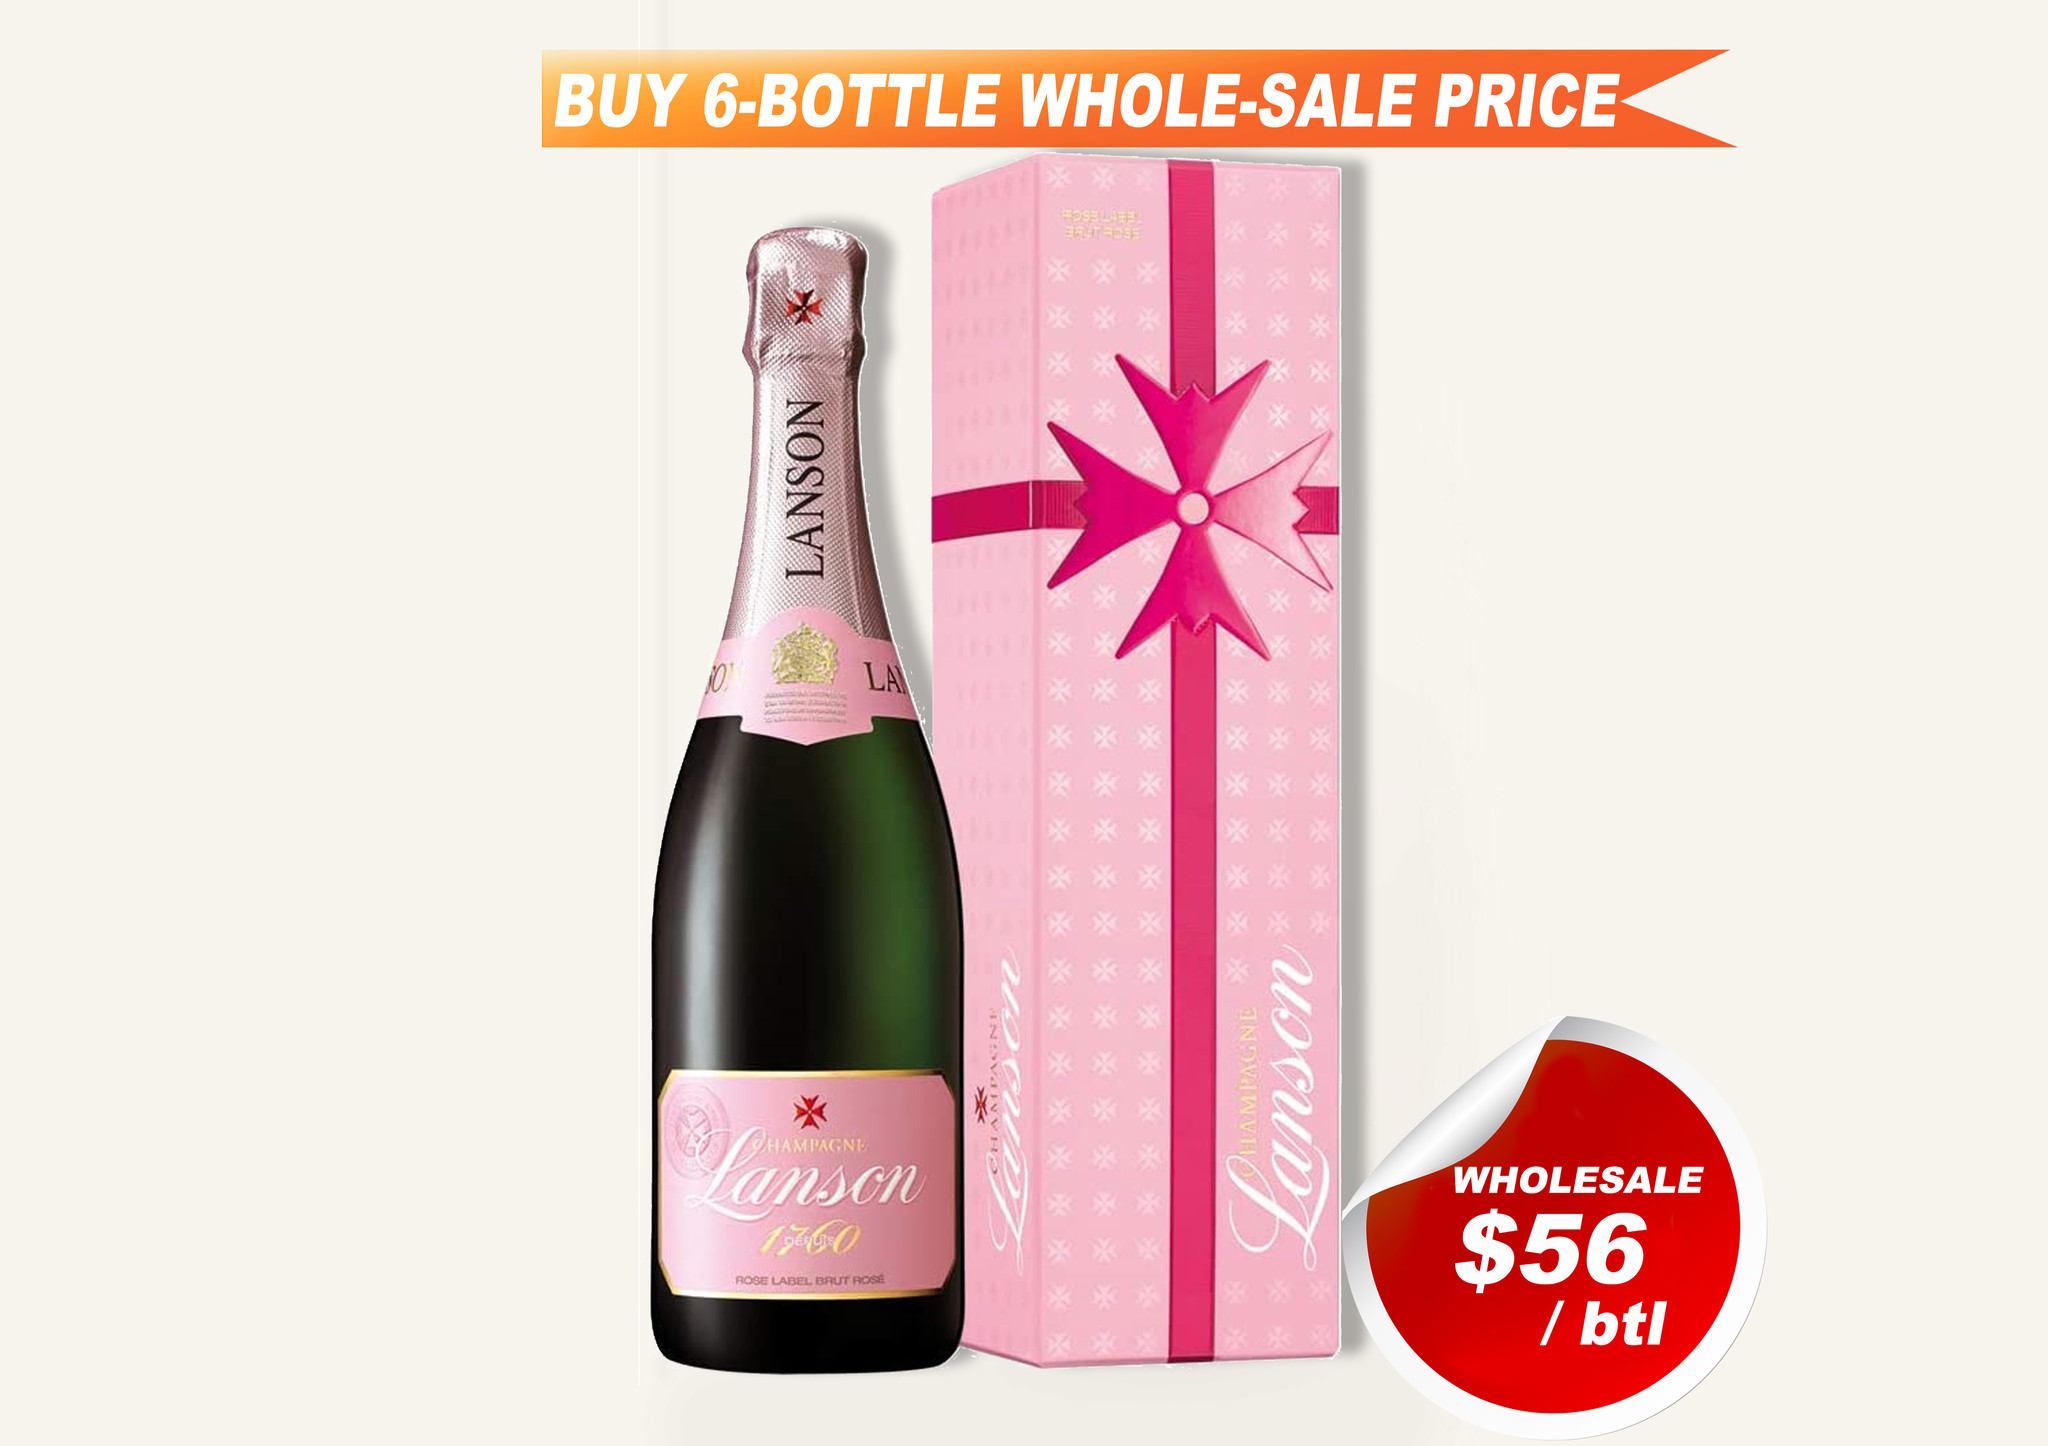 Lanson Brut $56 DELIVERY Fossil FREE Uncle Wine&Spirits - NV Rose box Gift